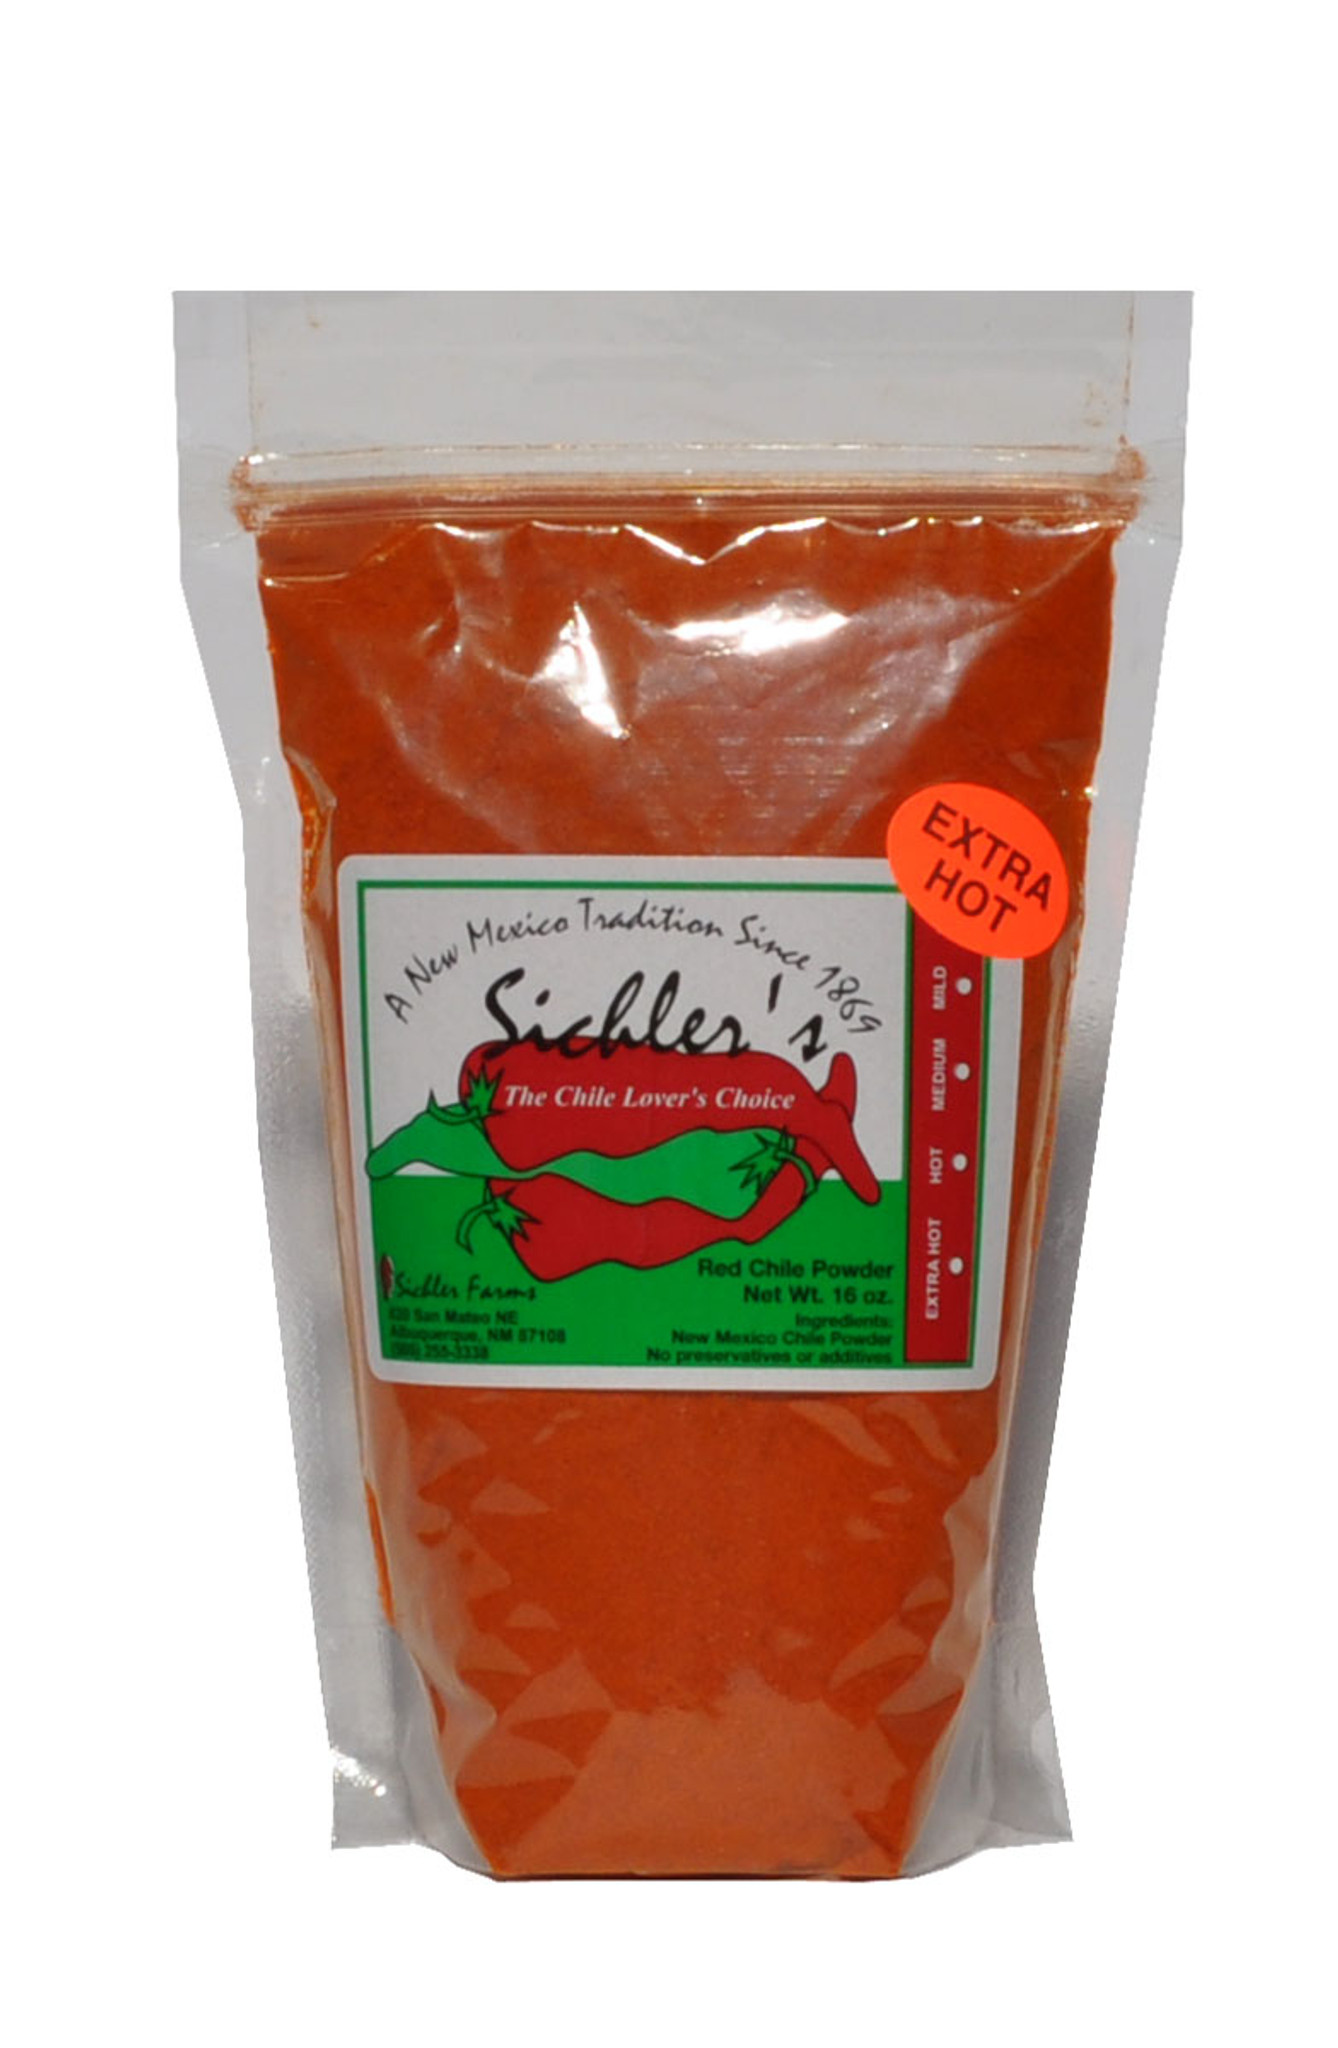 Sichlers New Mexico Red Chile Powder - 1 LB Bag